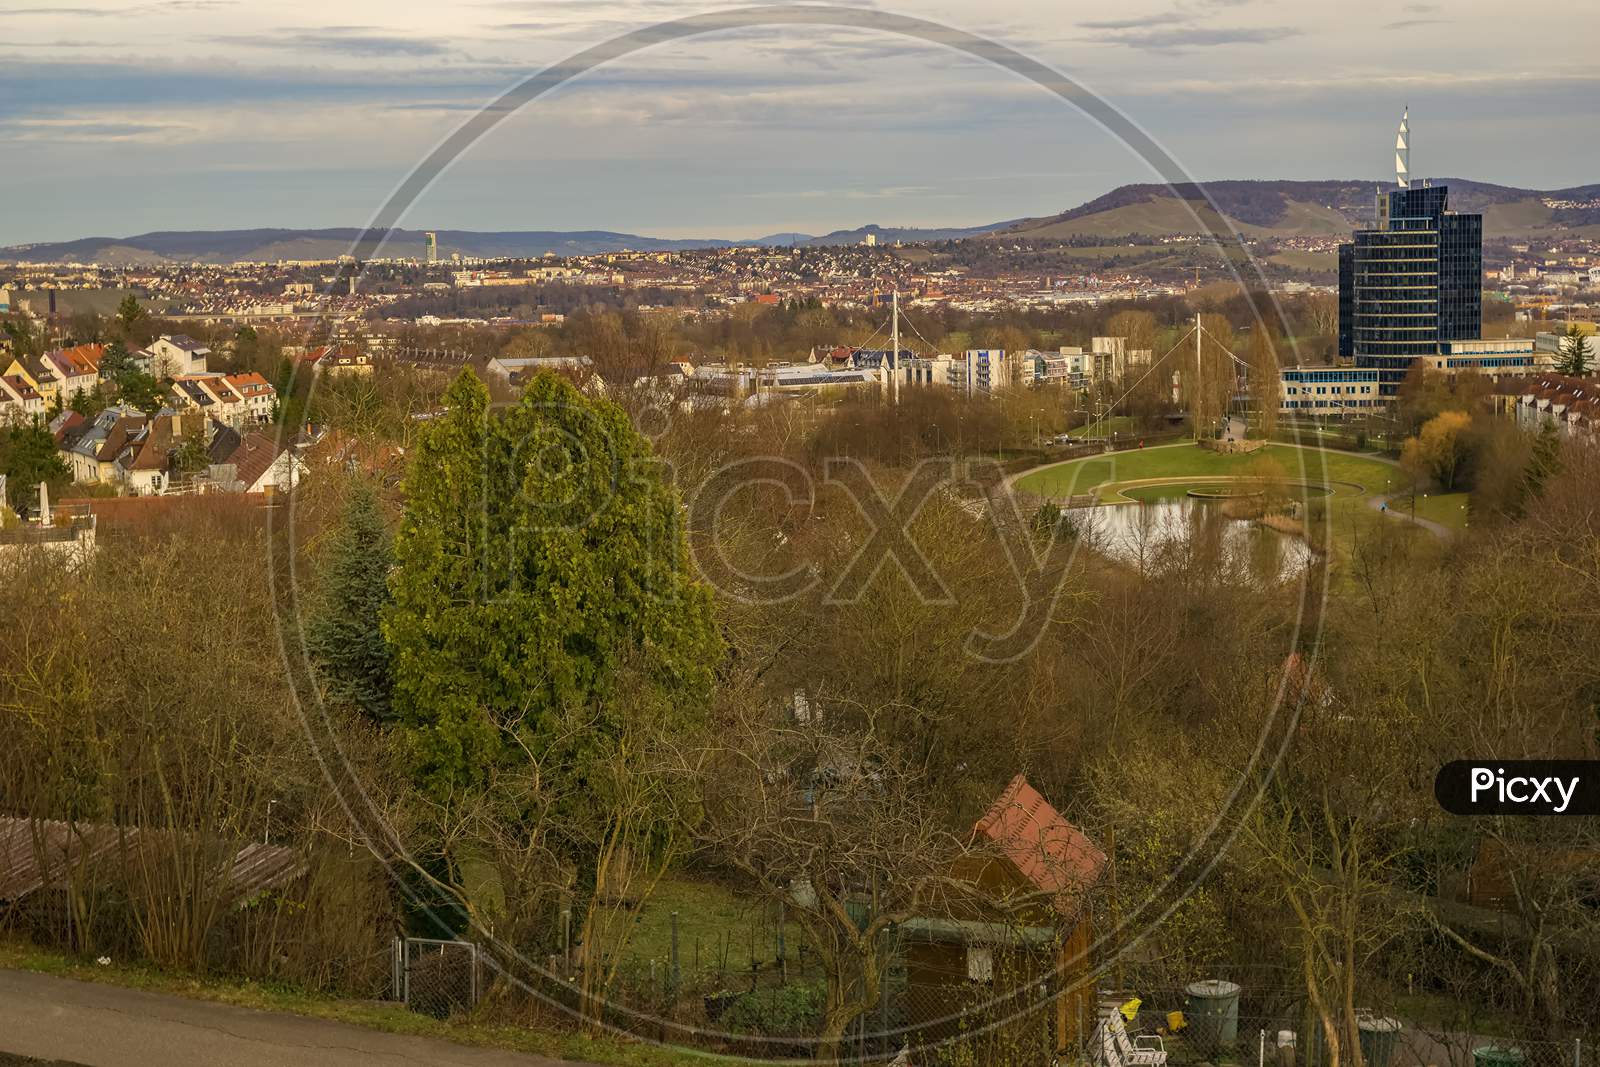 Stuttgart,Germany - March 12,2019:Killesberghoehe This Is The View From Sankt-Helens-Steg To The Northside Of The City With A Small Park,Old And New Buildings And Green Hills.